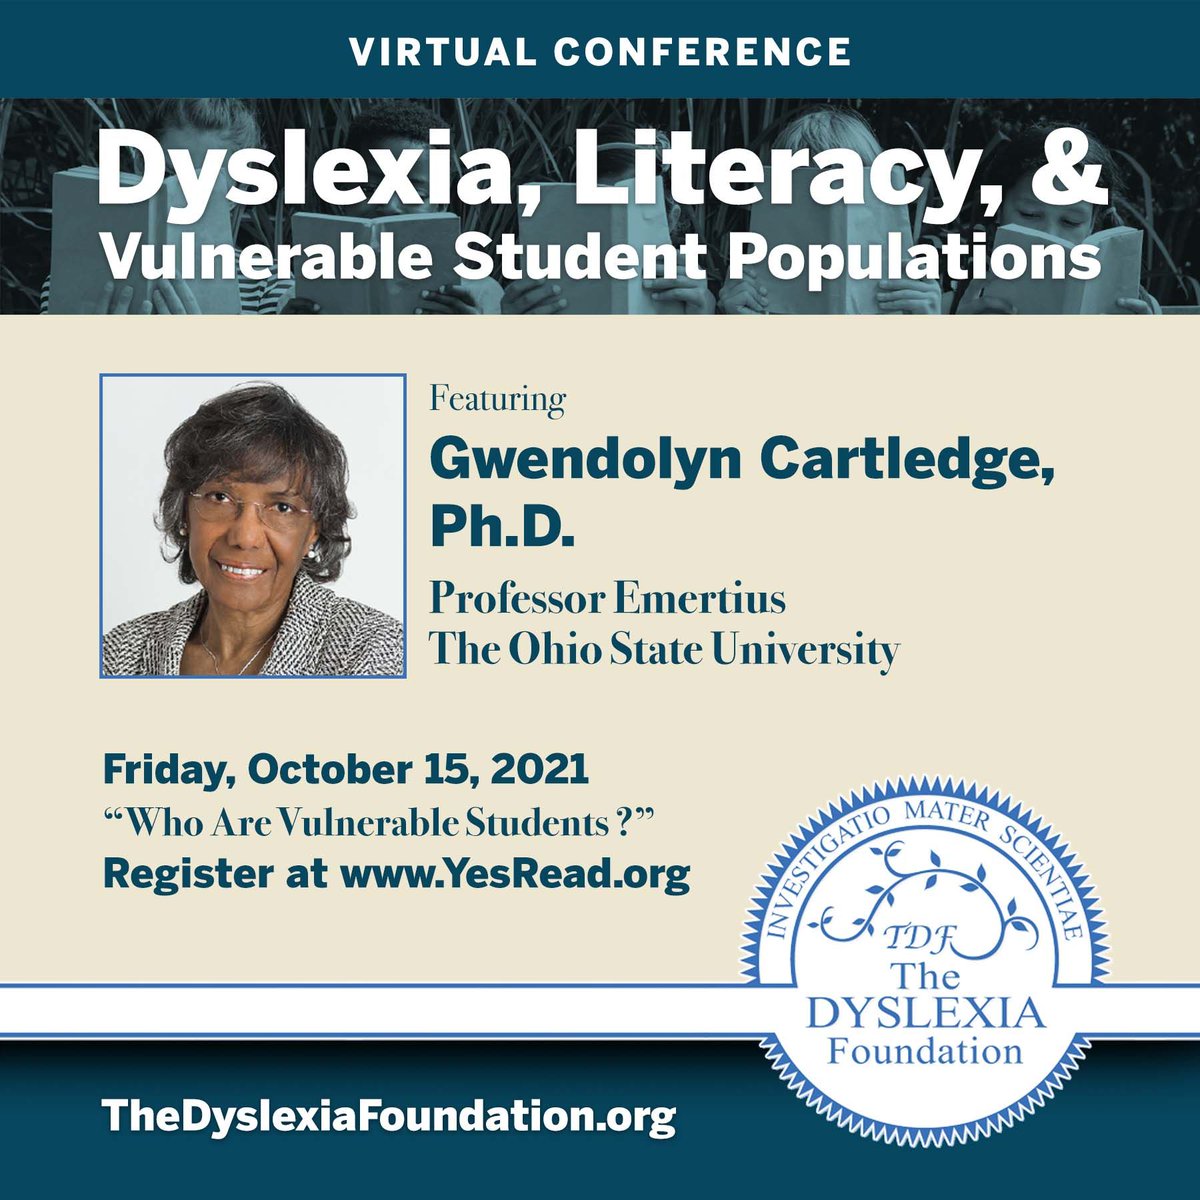 Join us virtually Friday October 15, 2021 for the annual TDF conference: Dyslexia, Literacy & Vulnerable Student Populations. Dr. Gwendolyn Cartledge will be speaking on 'Who are Vulnerable Students?' Register: buff.ly/2MKVA2f